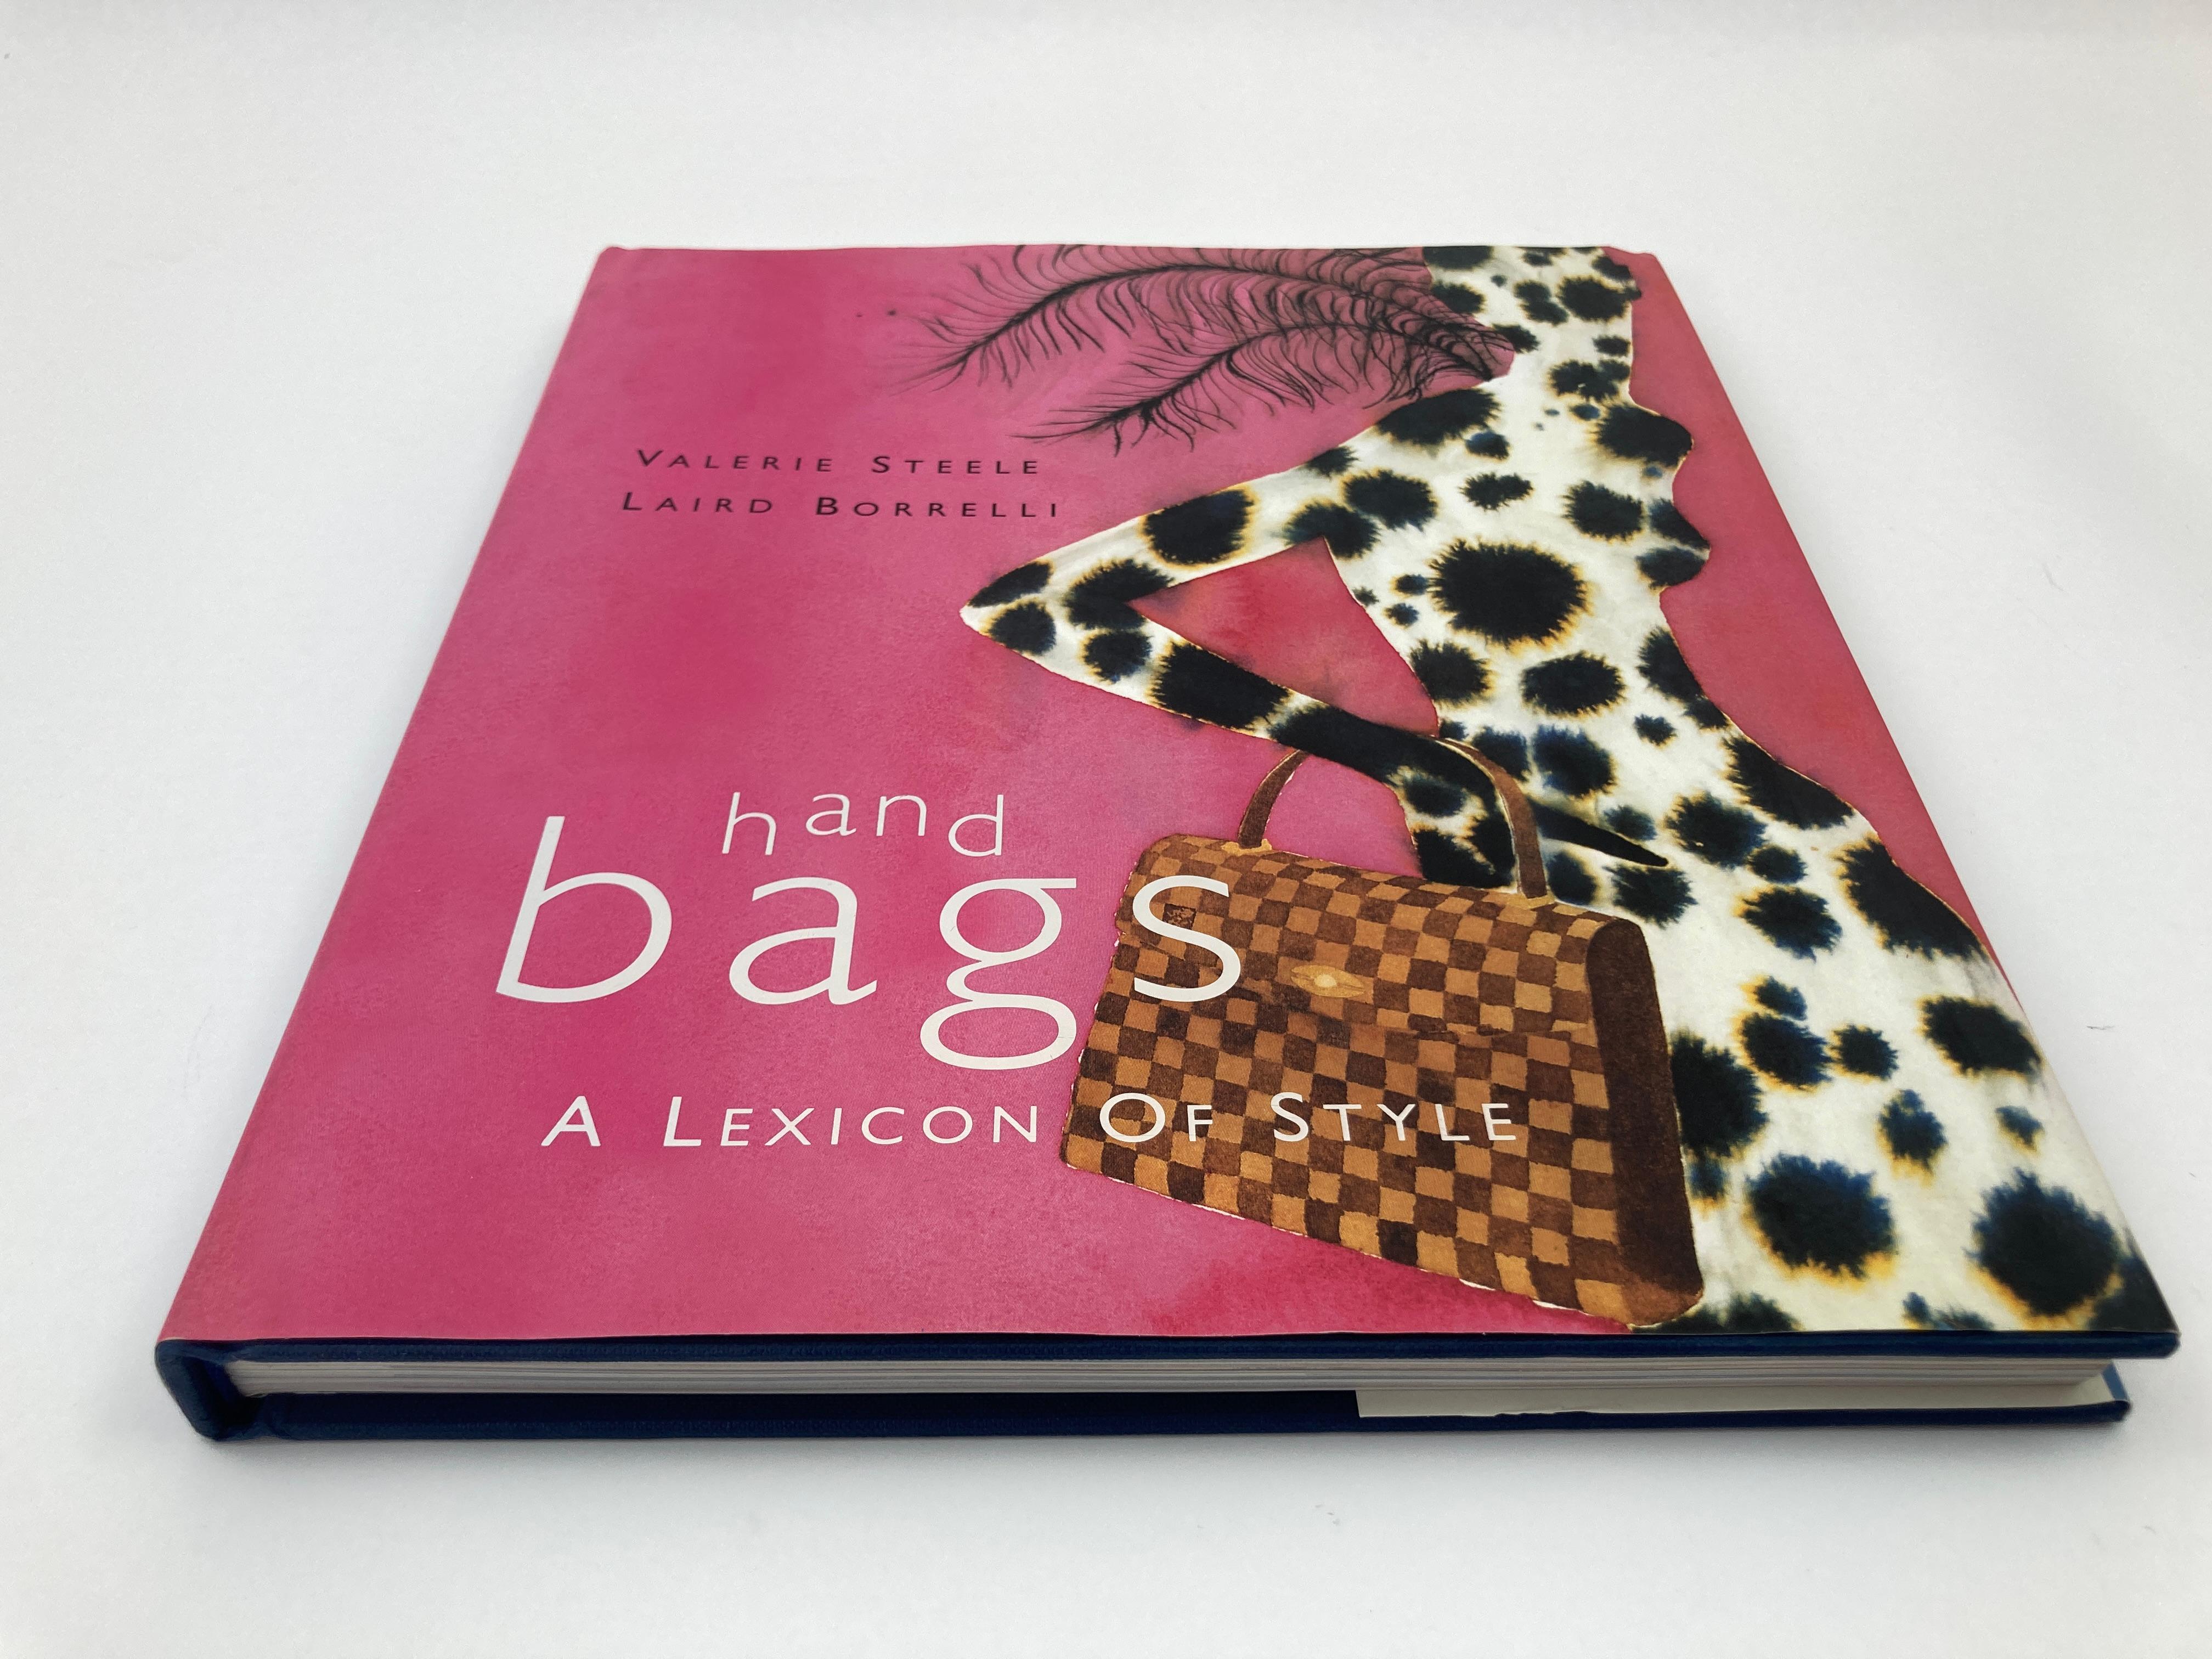 Bags : A Lexicon of Style Valerie Steele, Laird Borrelli Hardcover Book 1st Edition 1999. 
Large format coffee table book. Near Fine. Hardcover. First Edition. 11